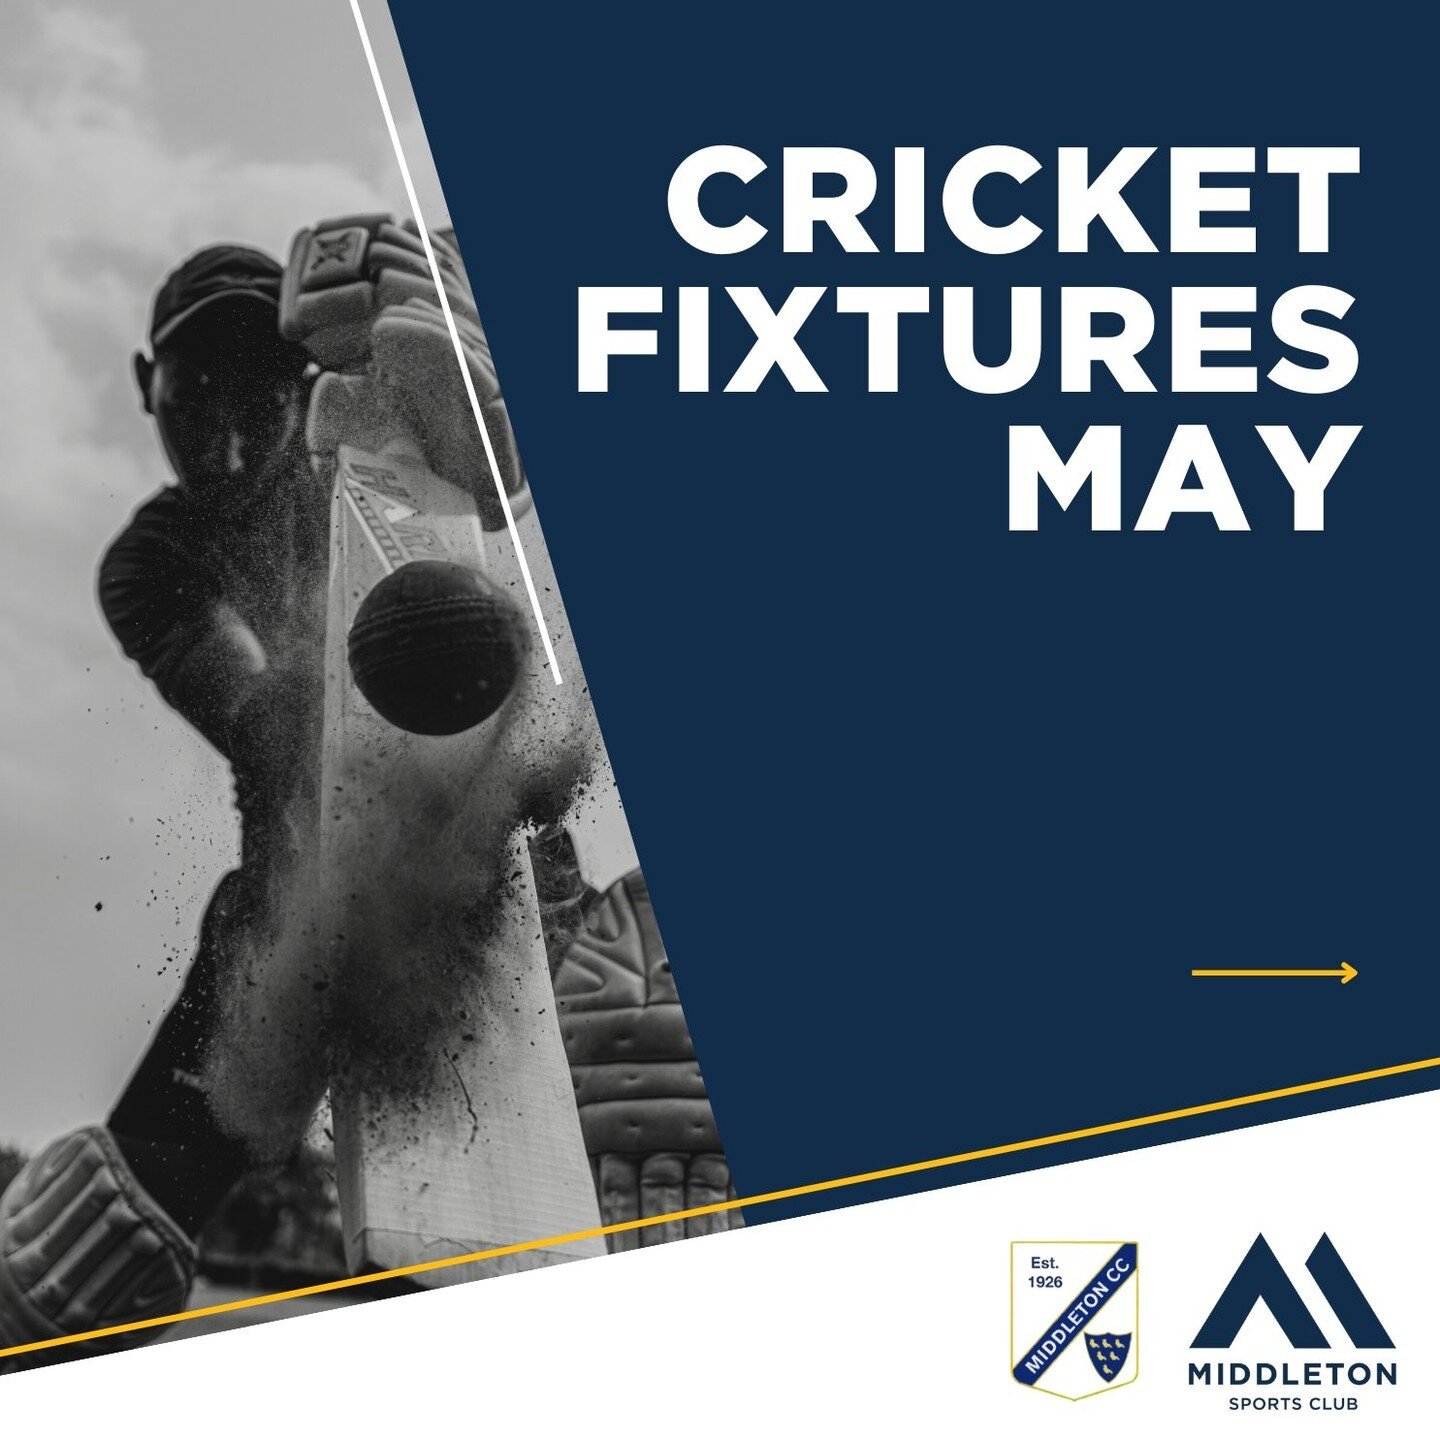 Cricket season is back! 

Scroll right to check our fixtures for May. 

#middletonsportsclub